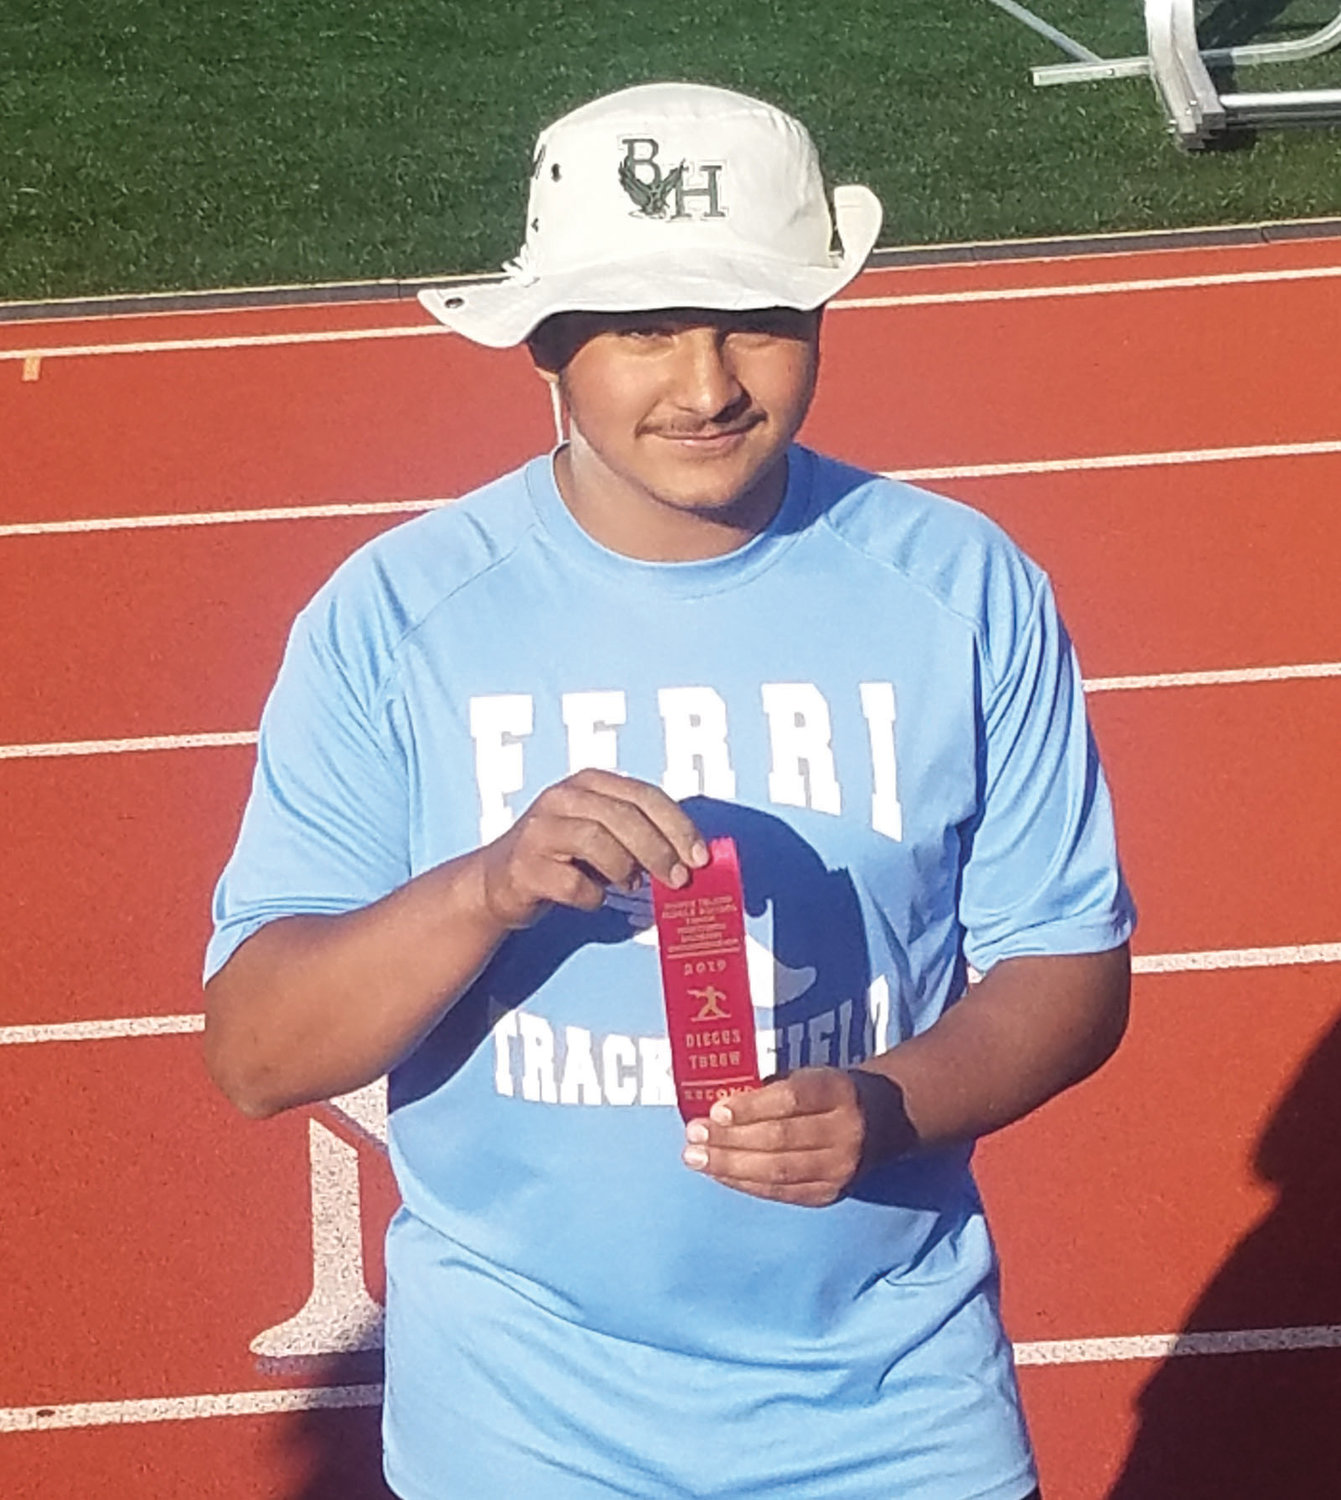 PROLIFIC PERFORMER: Nicholas A. Ferri Middle School eighth grader Phil Morin closed out his career by winning the shot put title during Saturday’s RI Middle School State Championships at Narragansett.